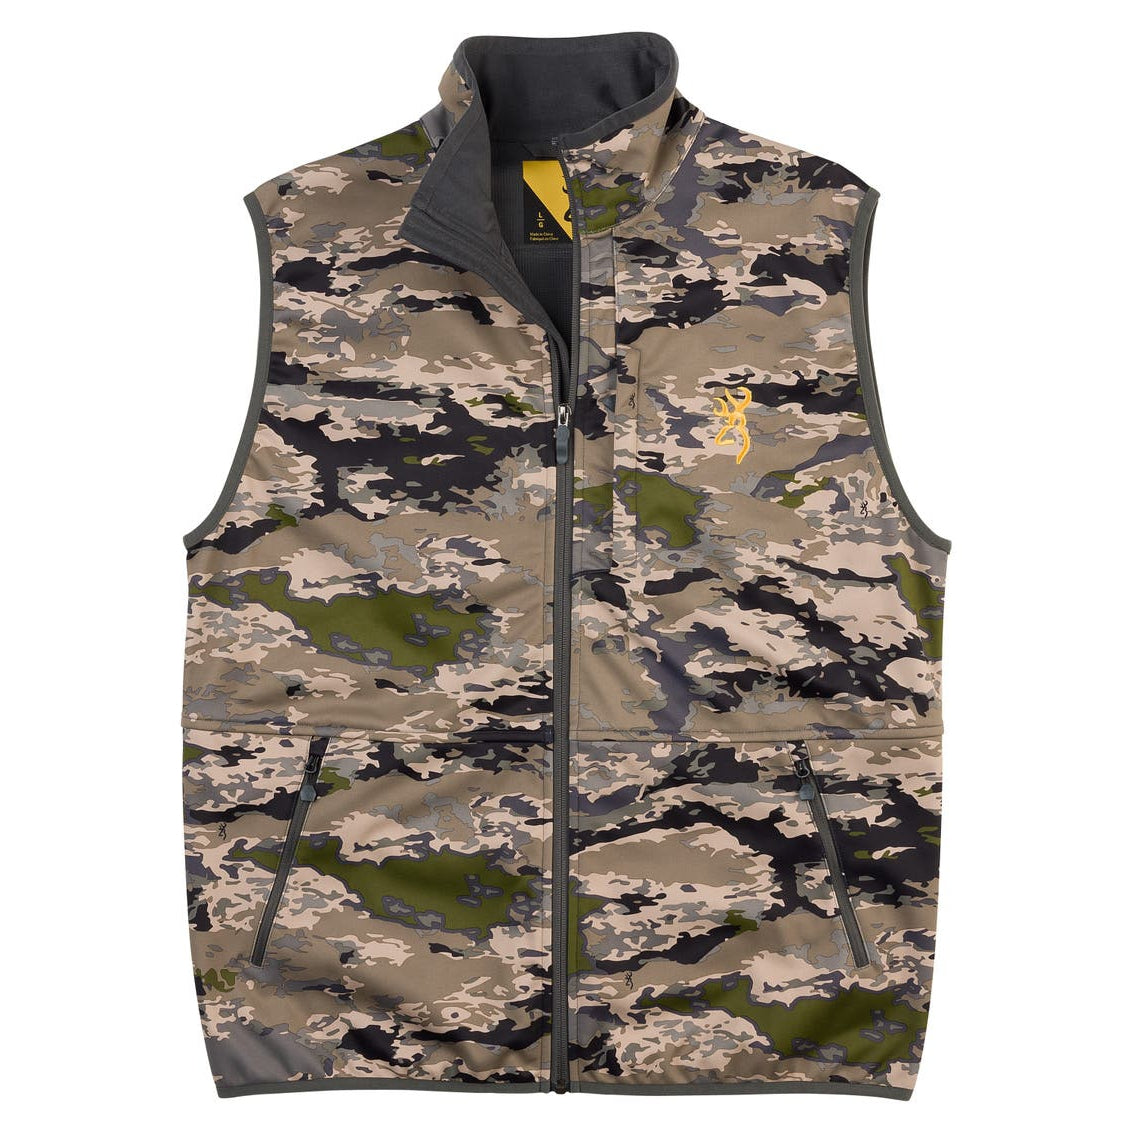 Browning Soft Shell Vest-Men's Clothing-Ovix-S-Kevin's Fine Outdoor Gear & Apparel